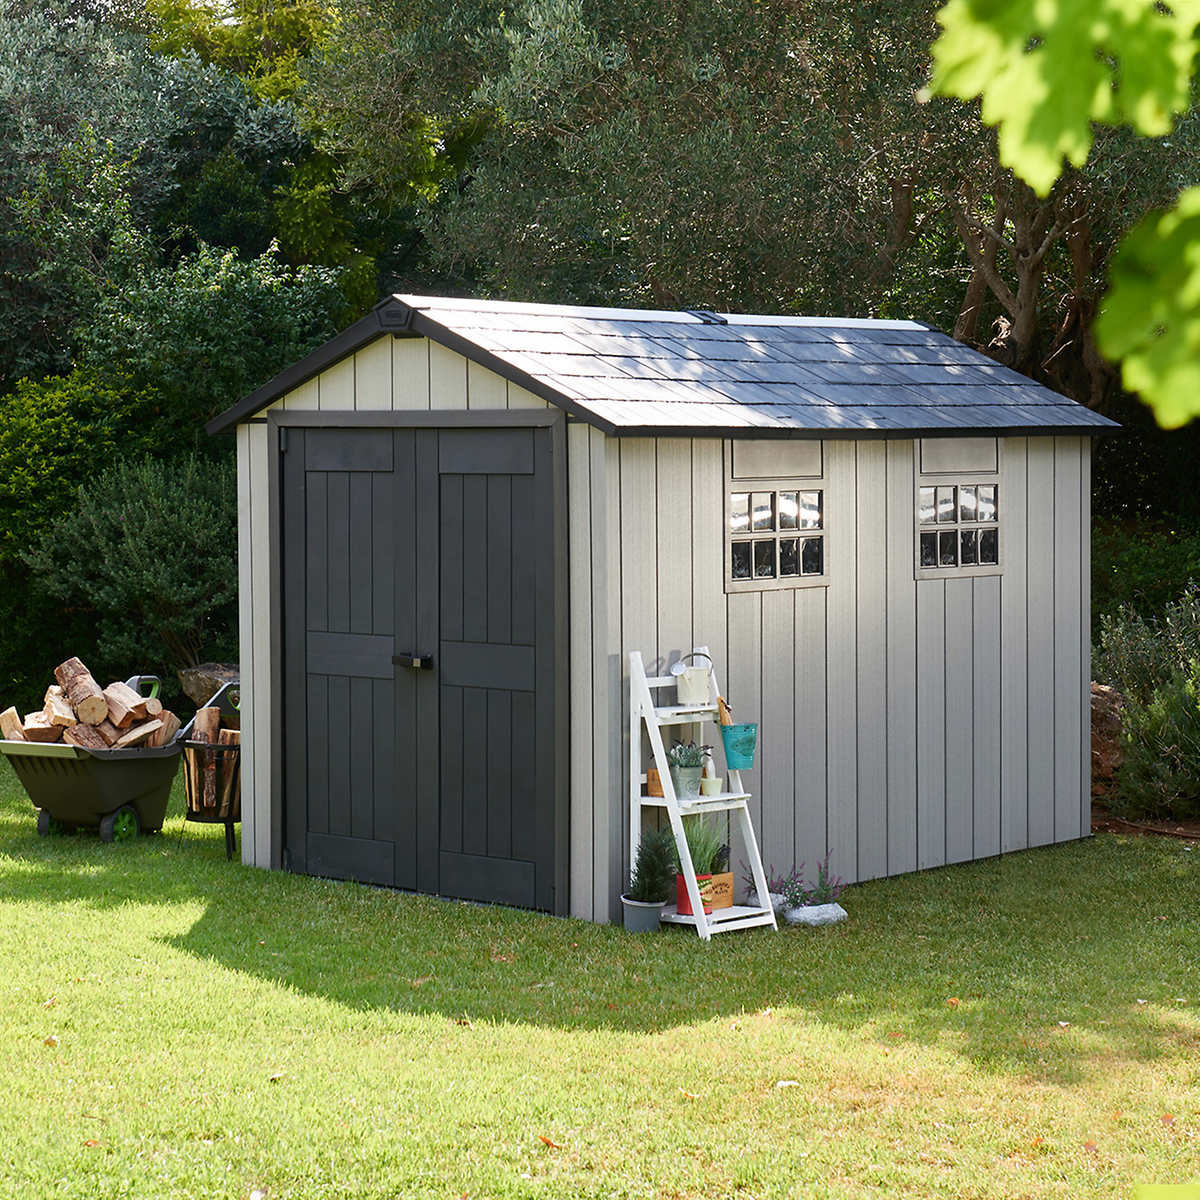 A simple gray shed with a familiar design